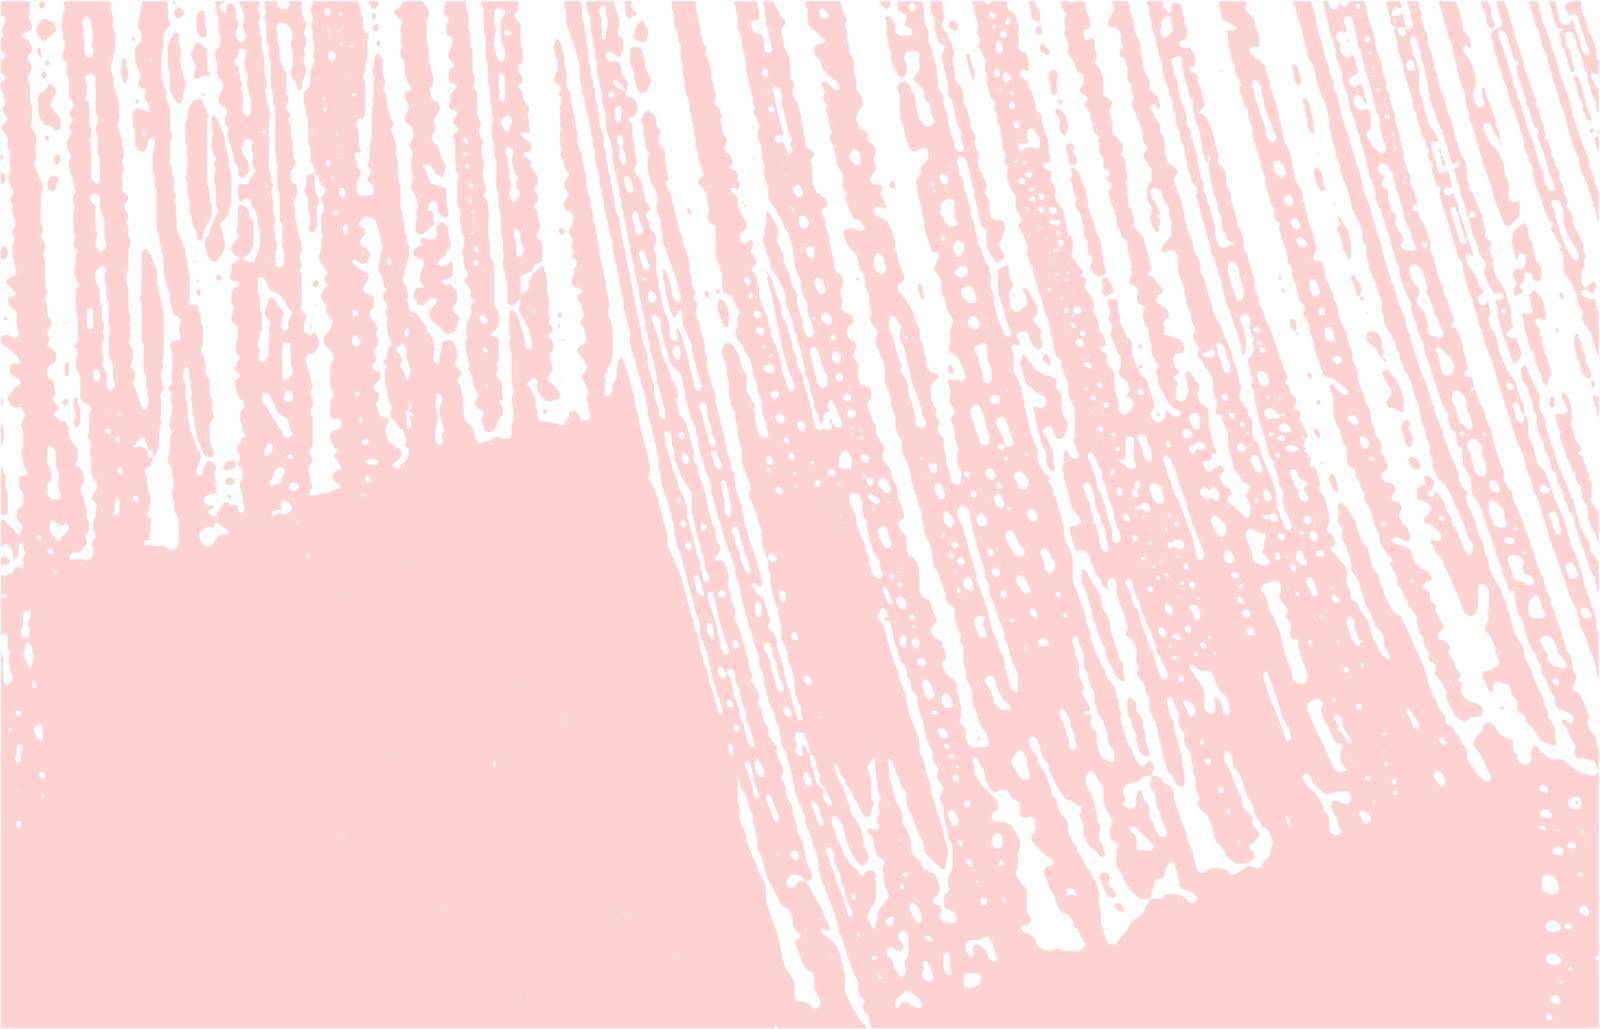 Grunge texture. Distress pink rough trace. Graceful background. Noise dirty grunge texture. Perfect artistic surface. Vector illustration.